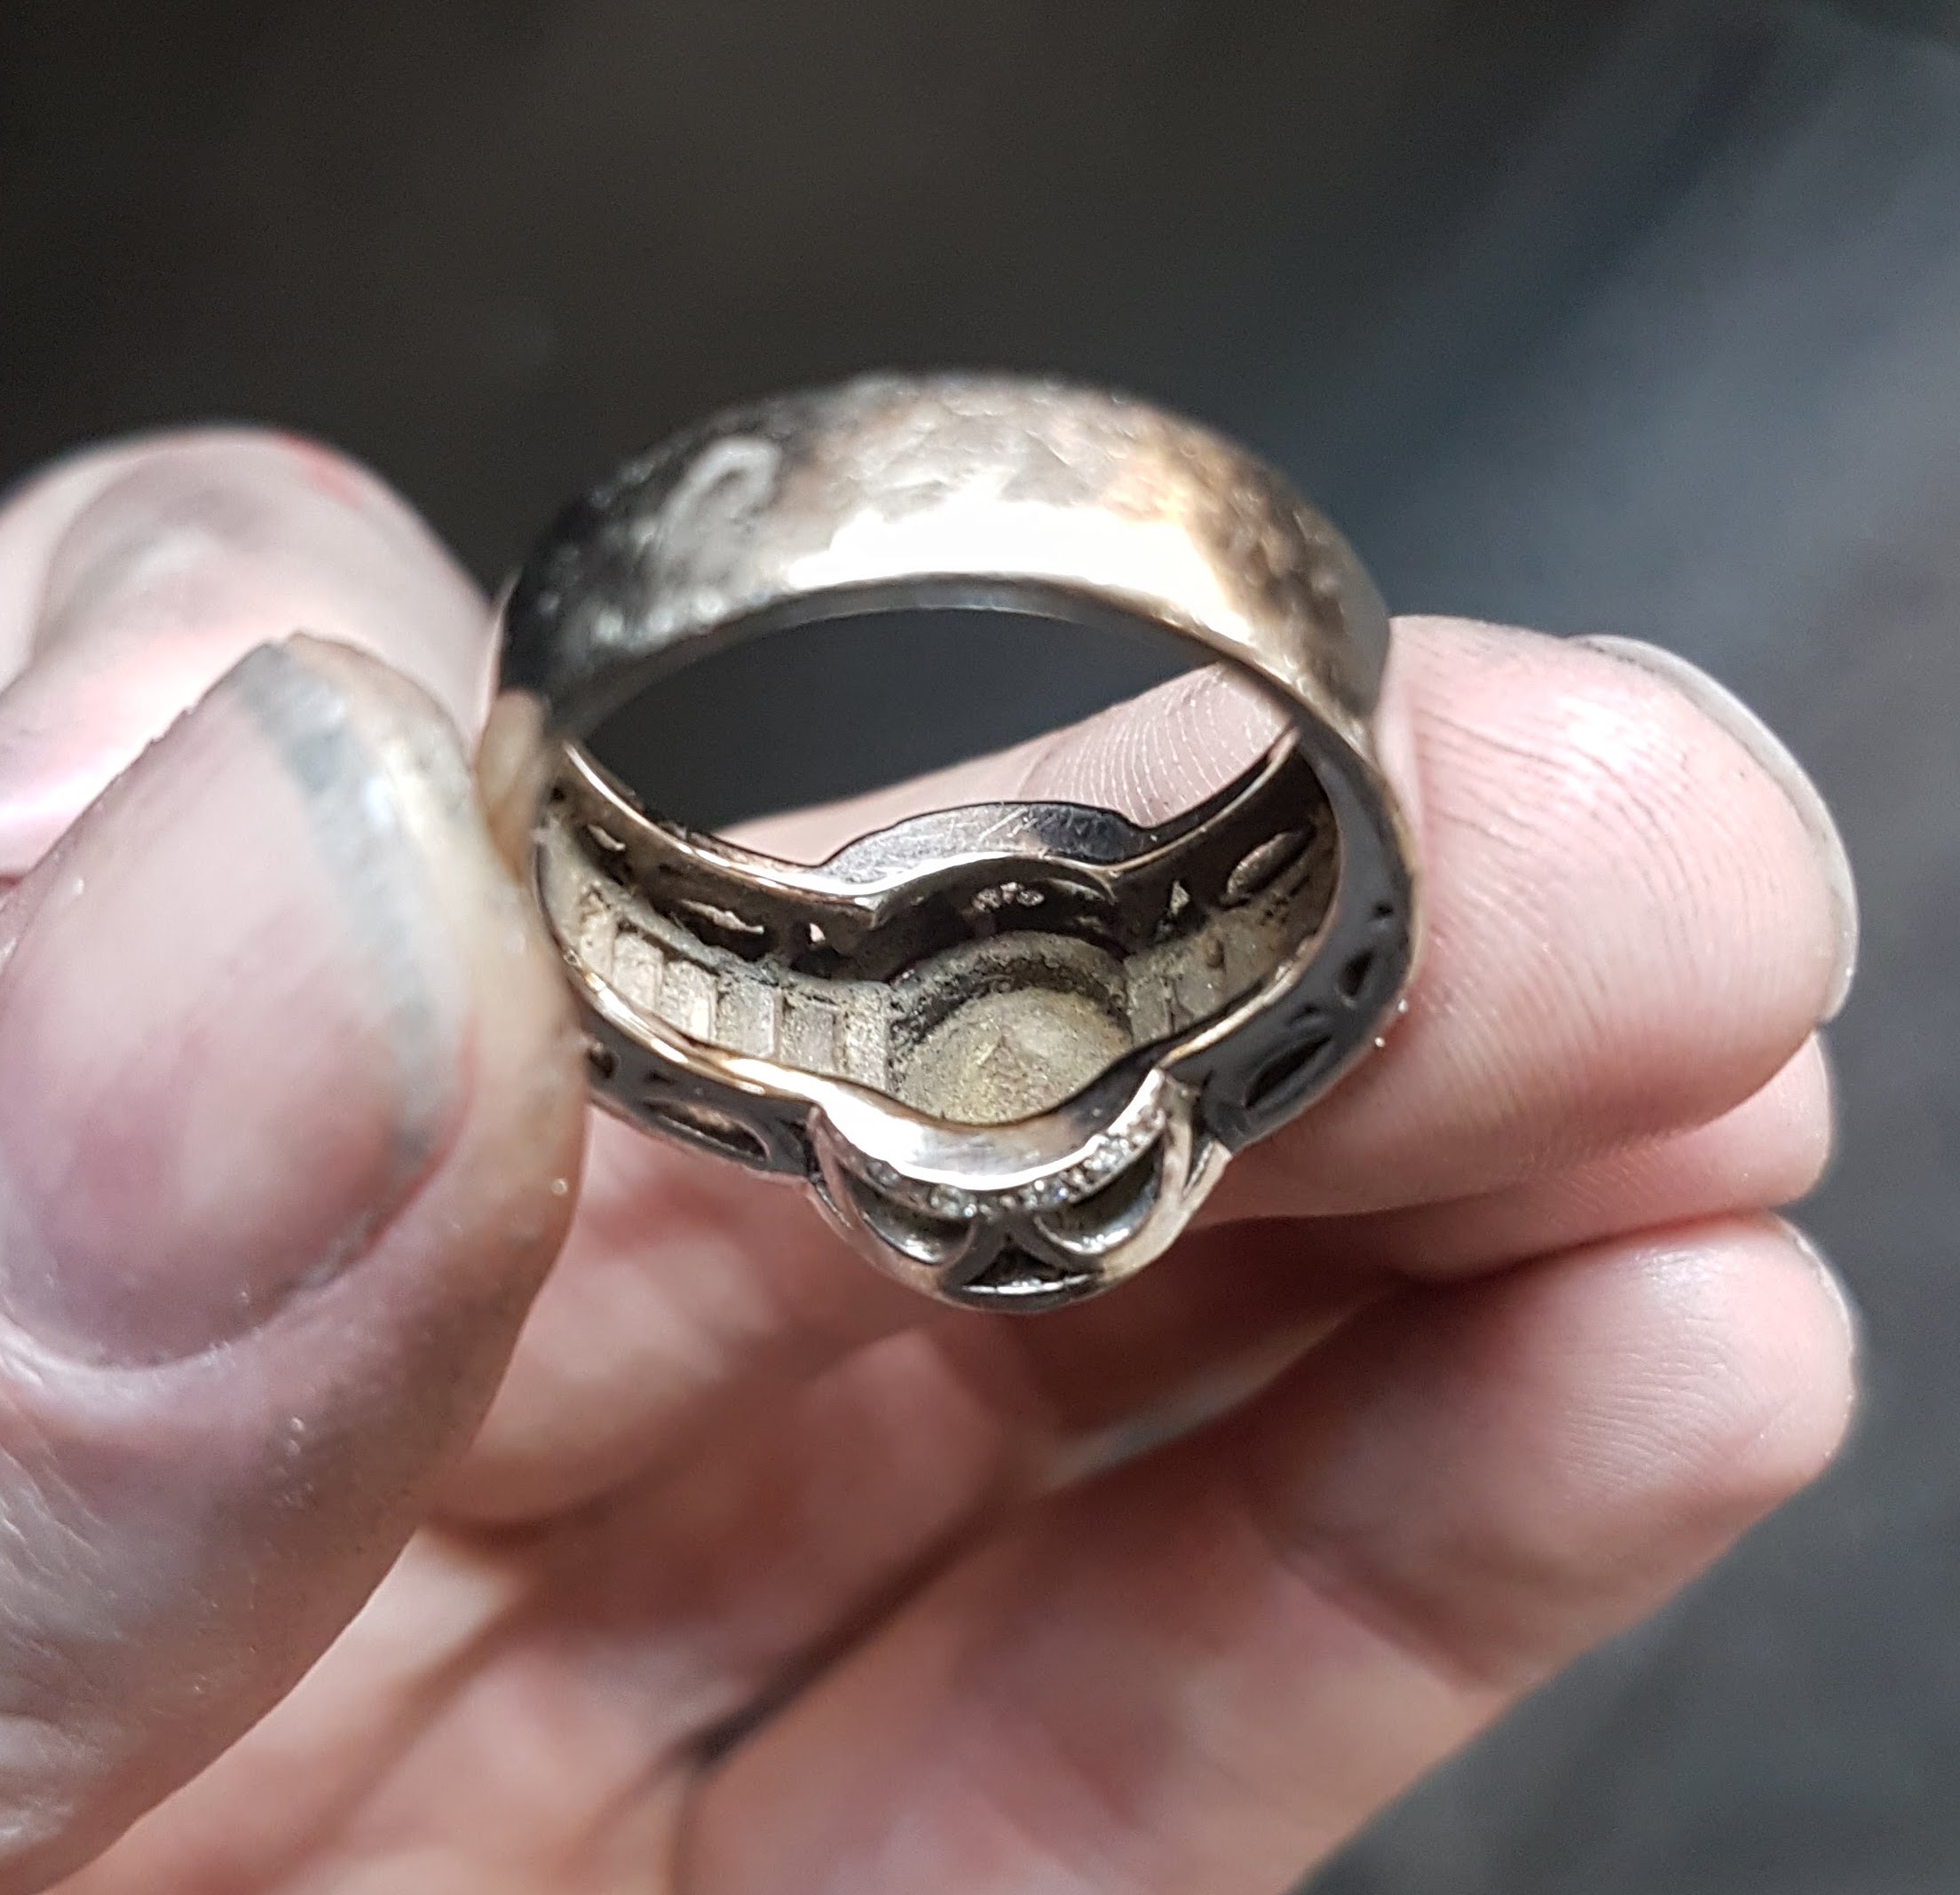 Dirt underneath the settings in a ring